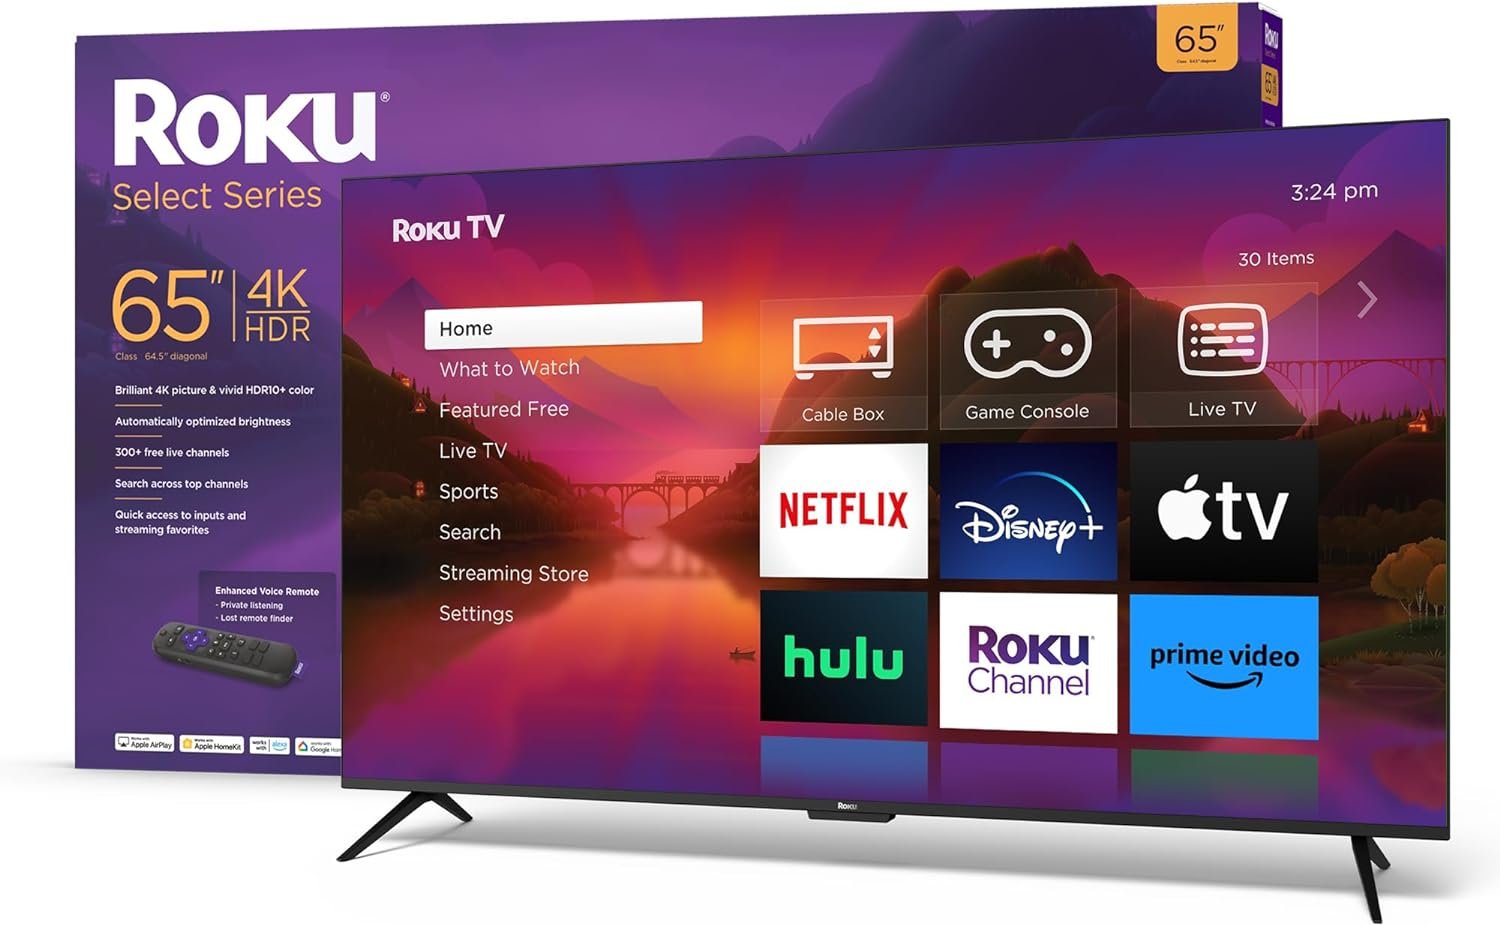 Roku 65" Select Series 4K HDR Smart RokuTV with Enhanced Voice Remote, Brilliant 4K Picture, Automatic Brightness, and Seamless Streaming